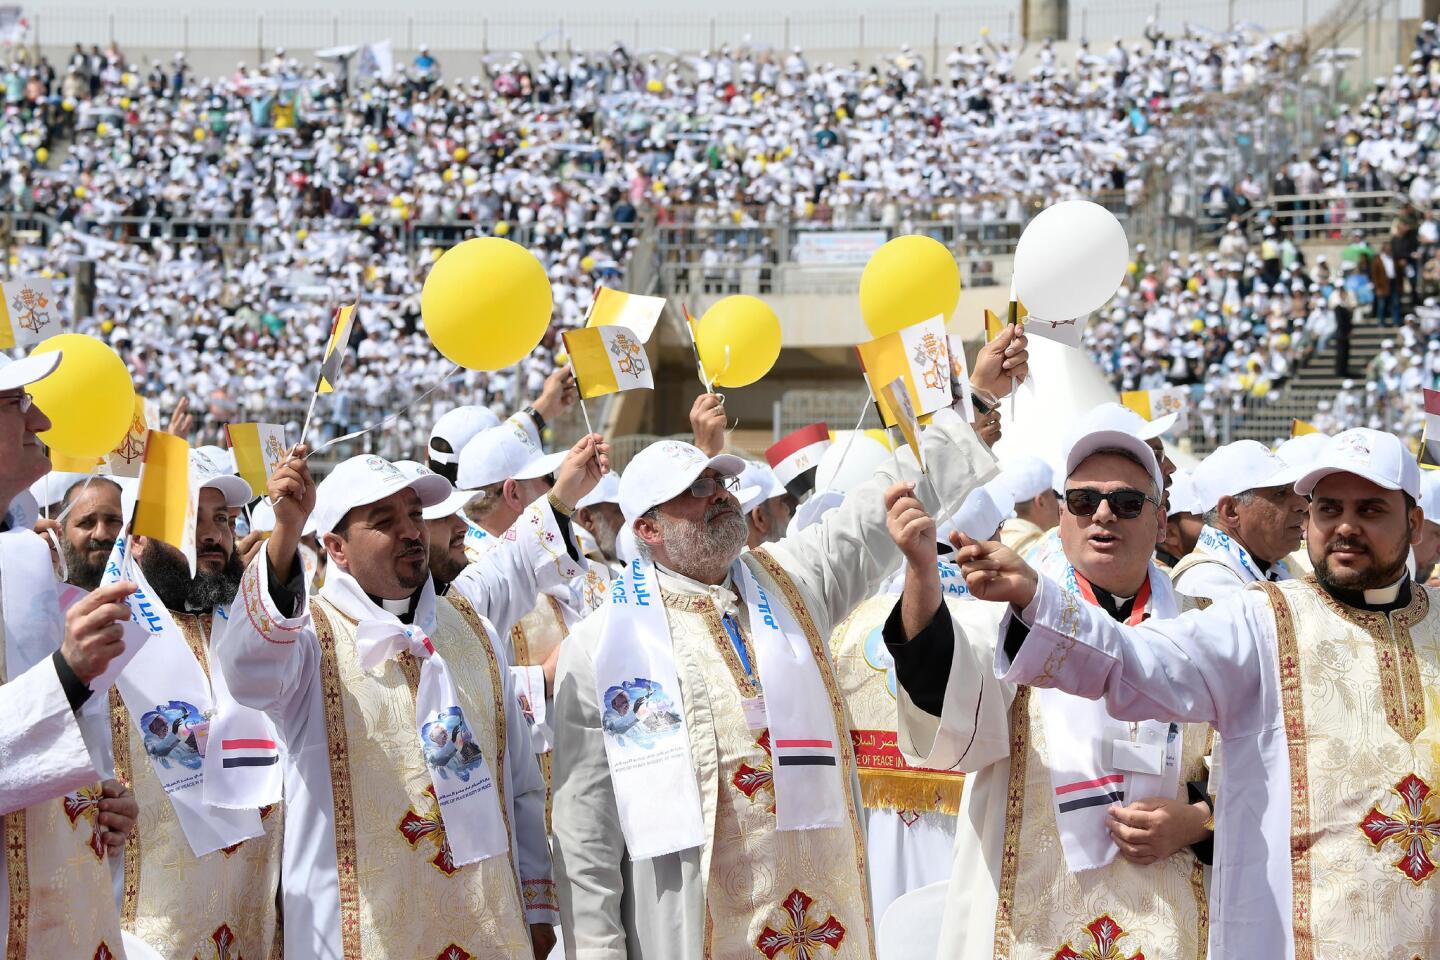 A photo from the Vatican press office shows Egyptian priests during a Mass celebrated by Pope Francis at a Cairo stadium.